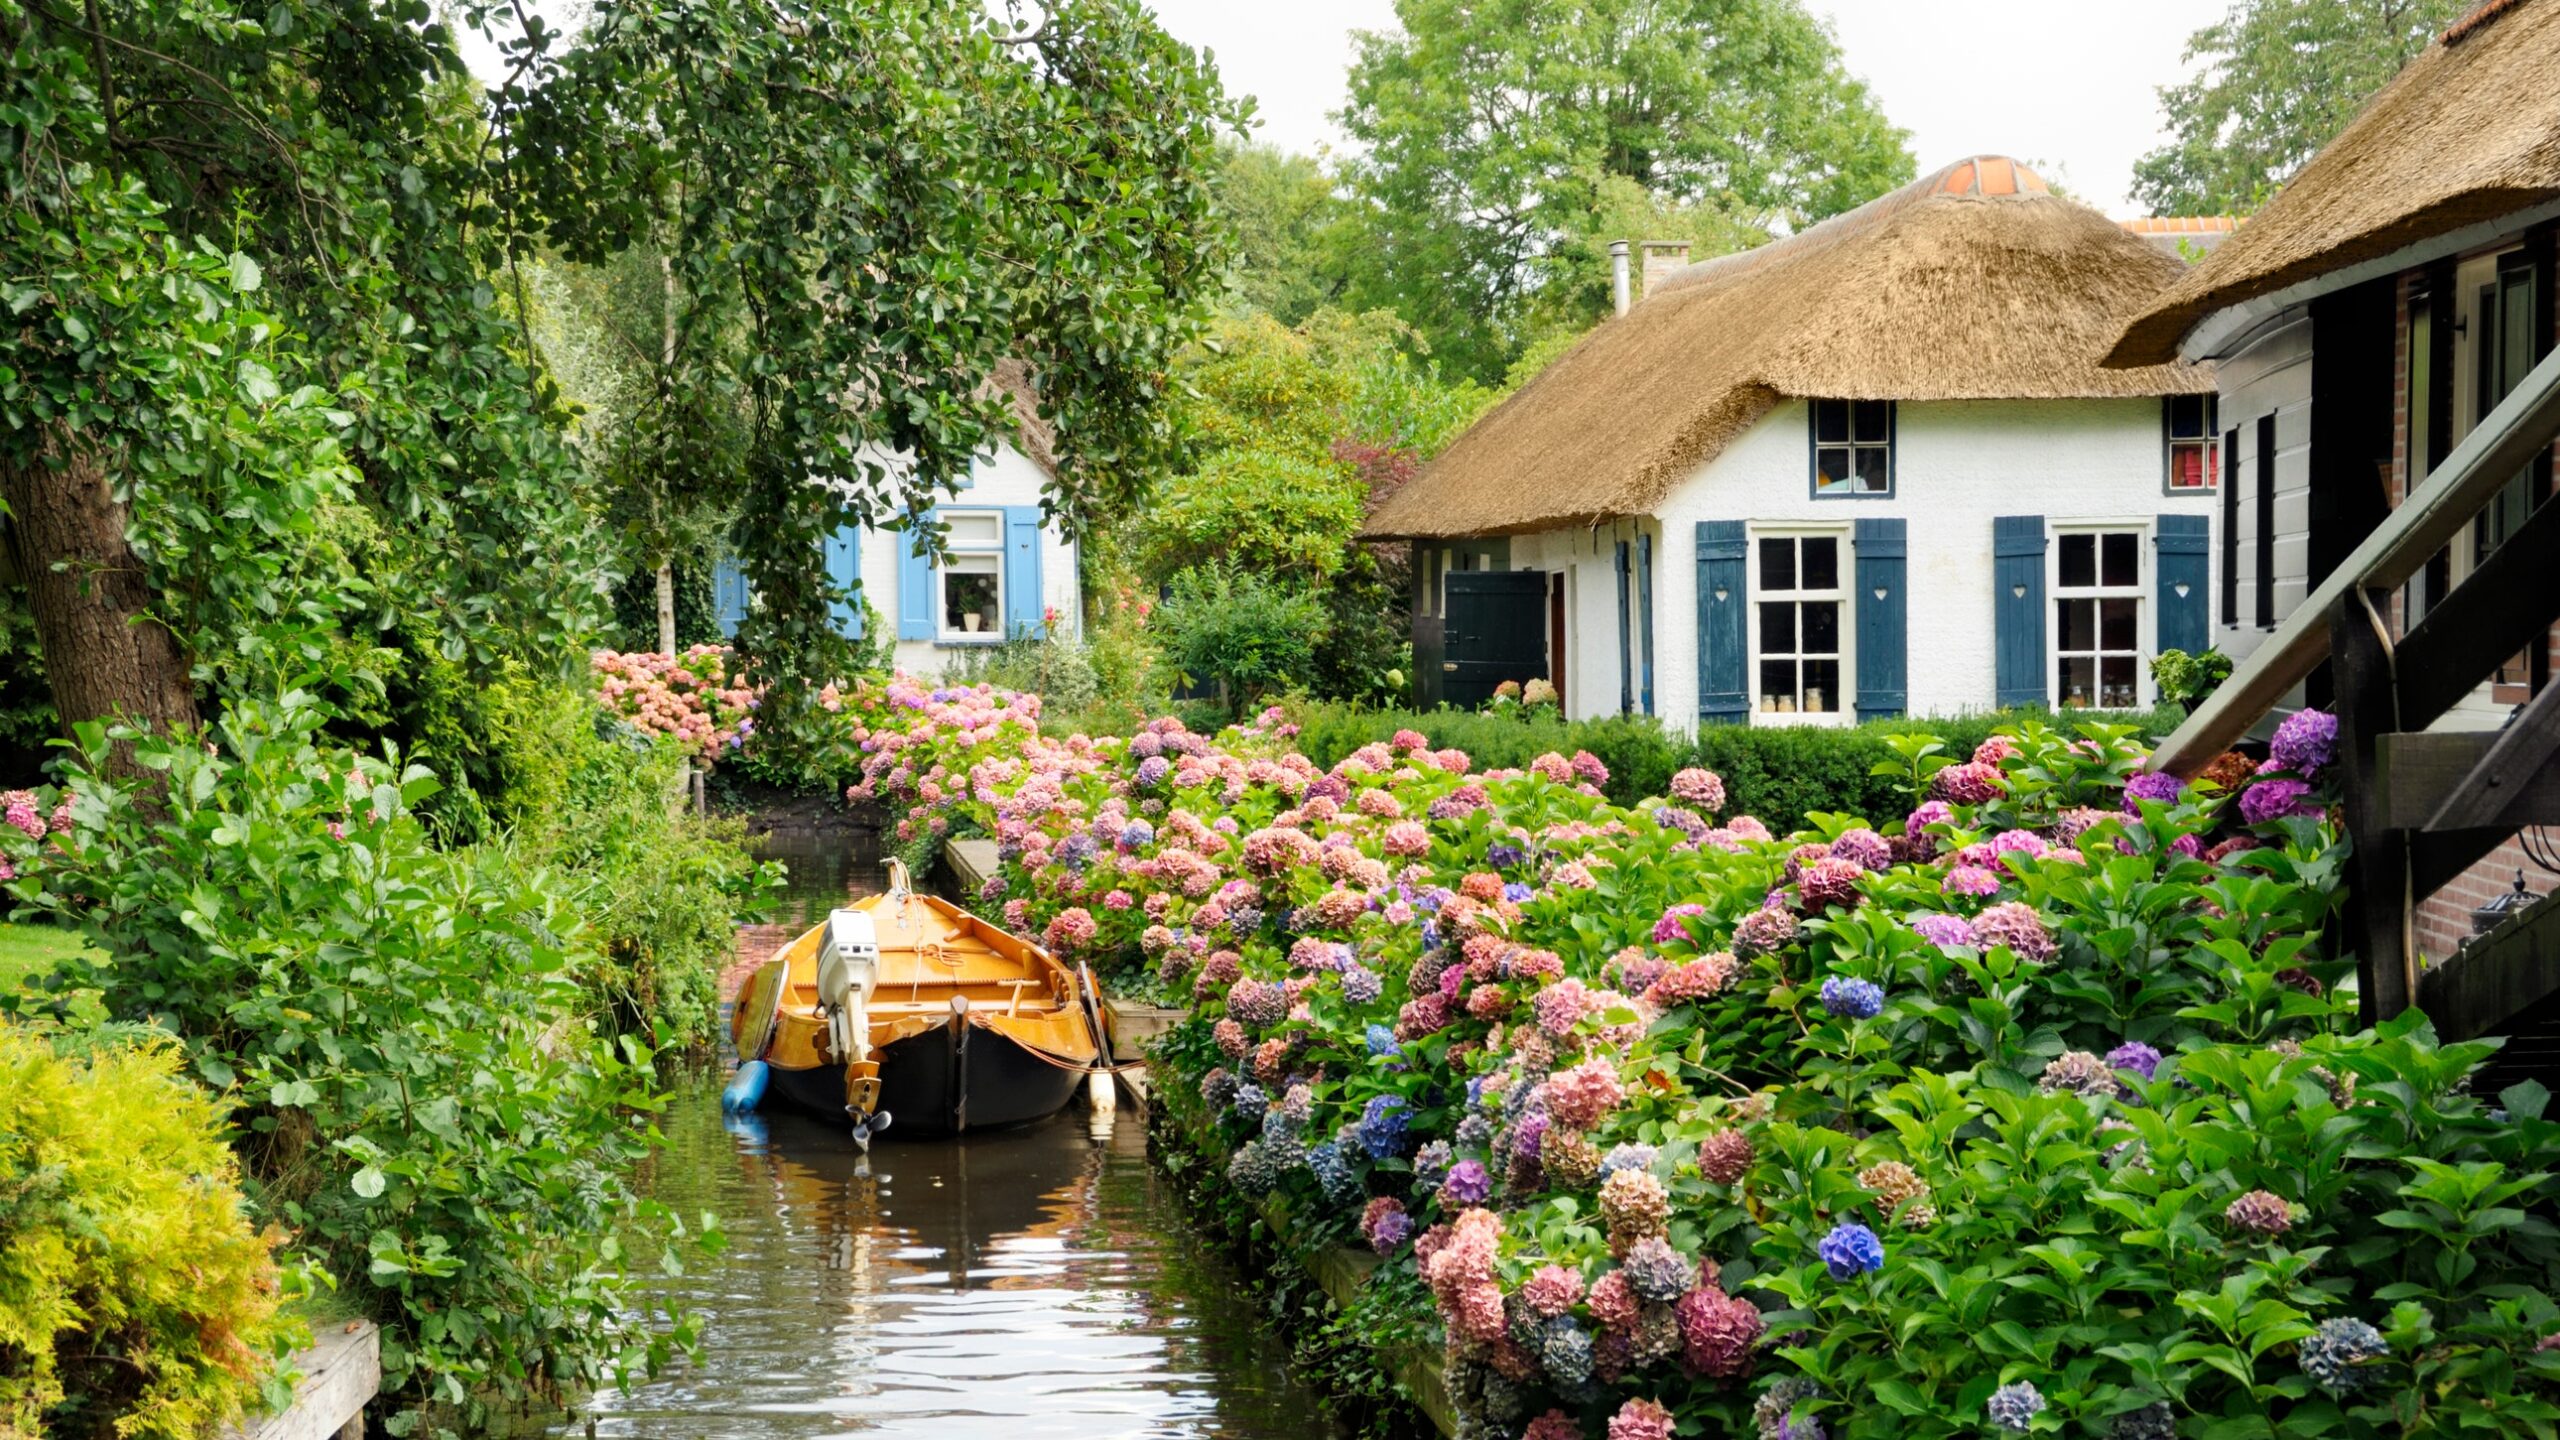 The World’s 11 Most Beautiful Thatched Roof Villages